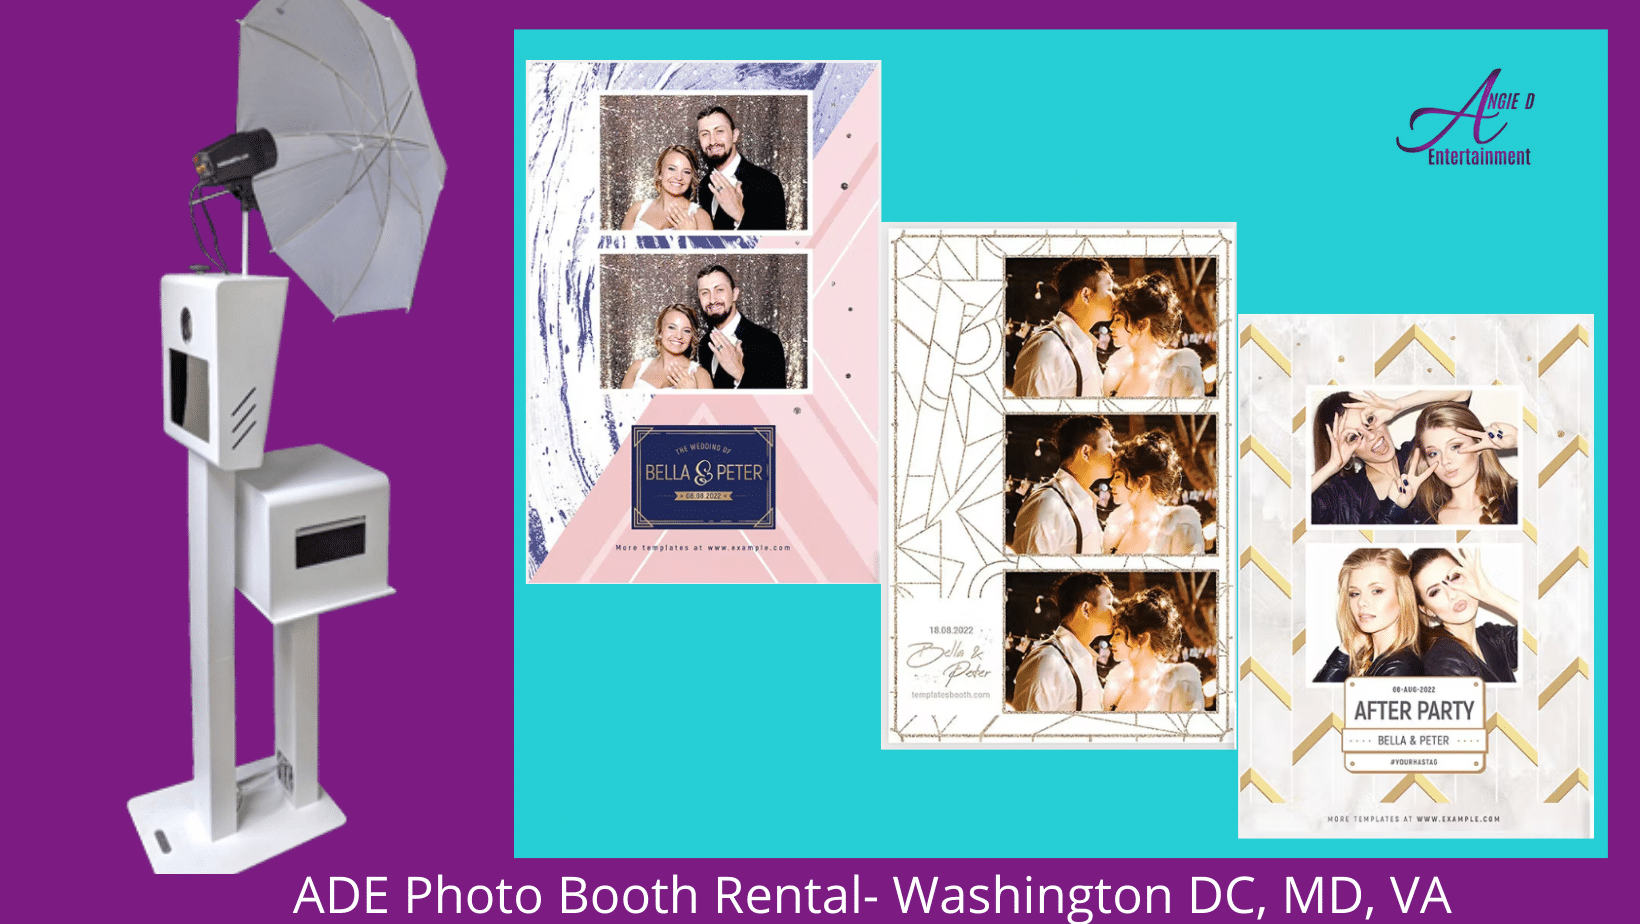 Should I rent a Photo Booth for my wedding reception?